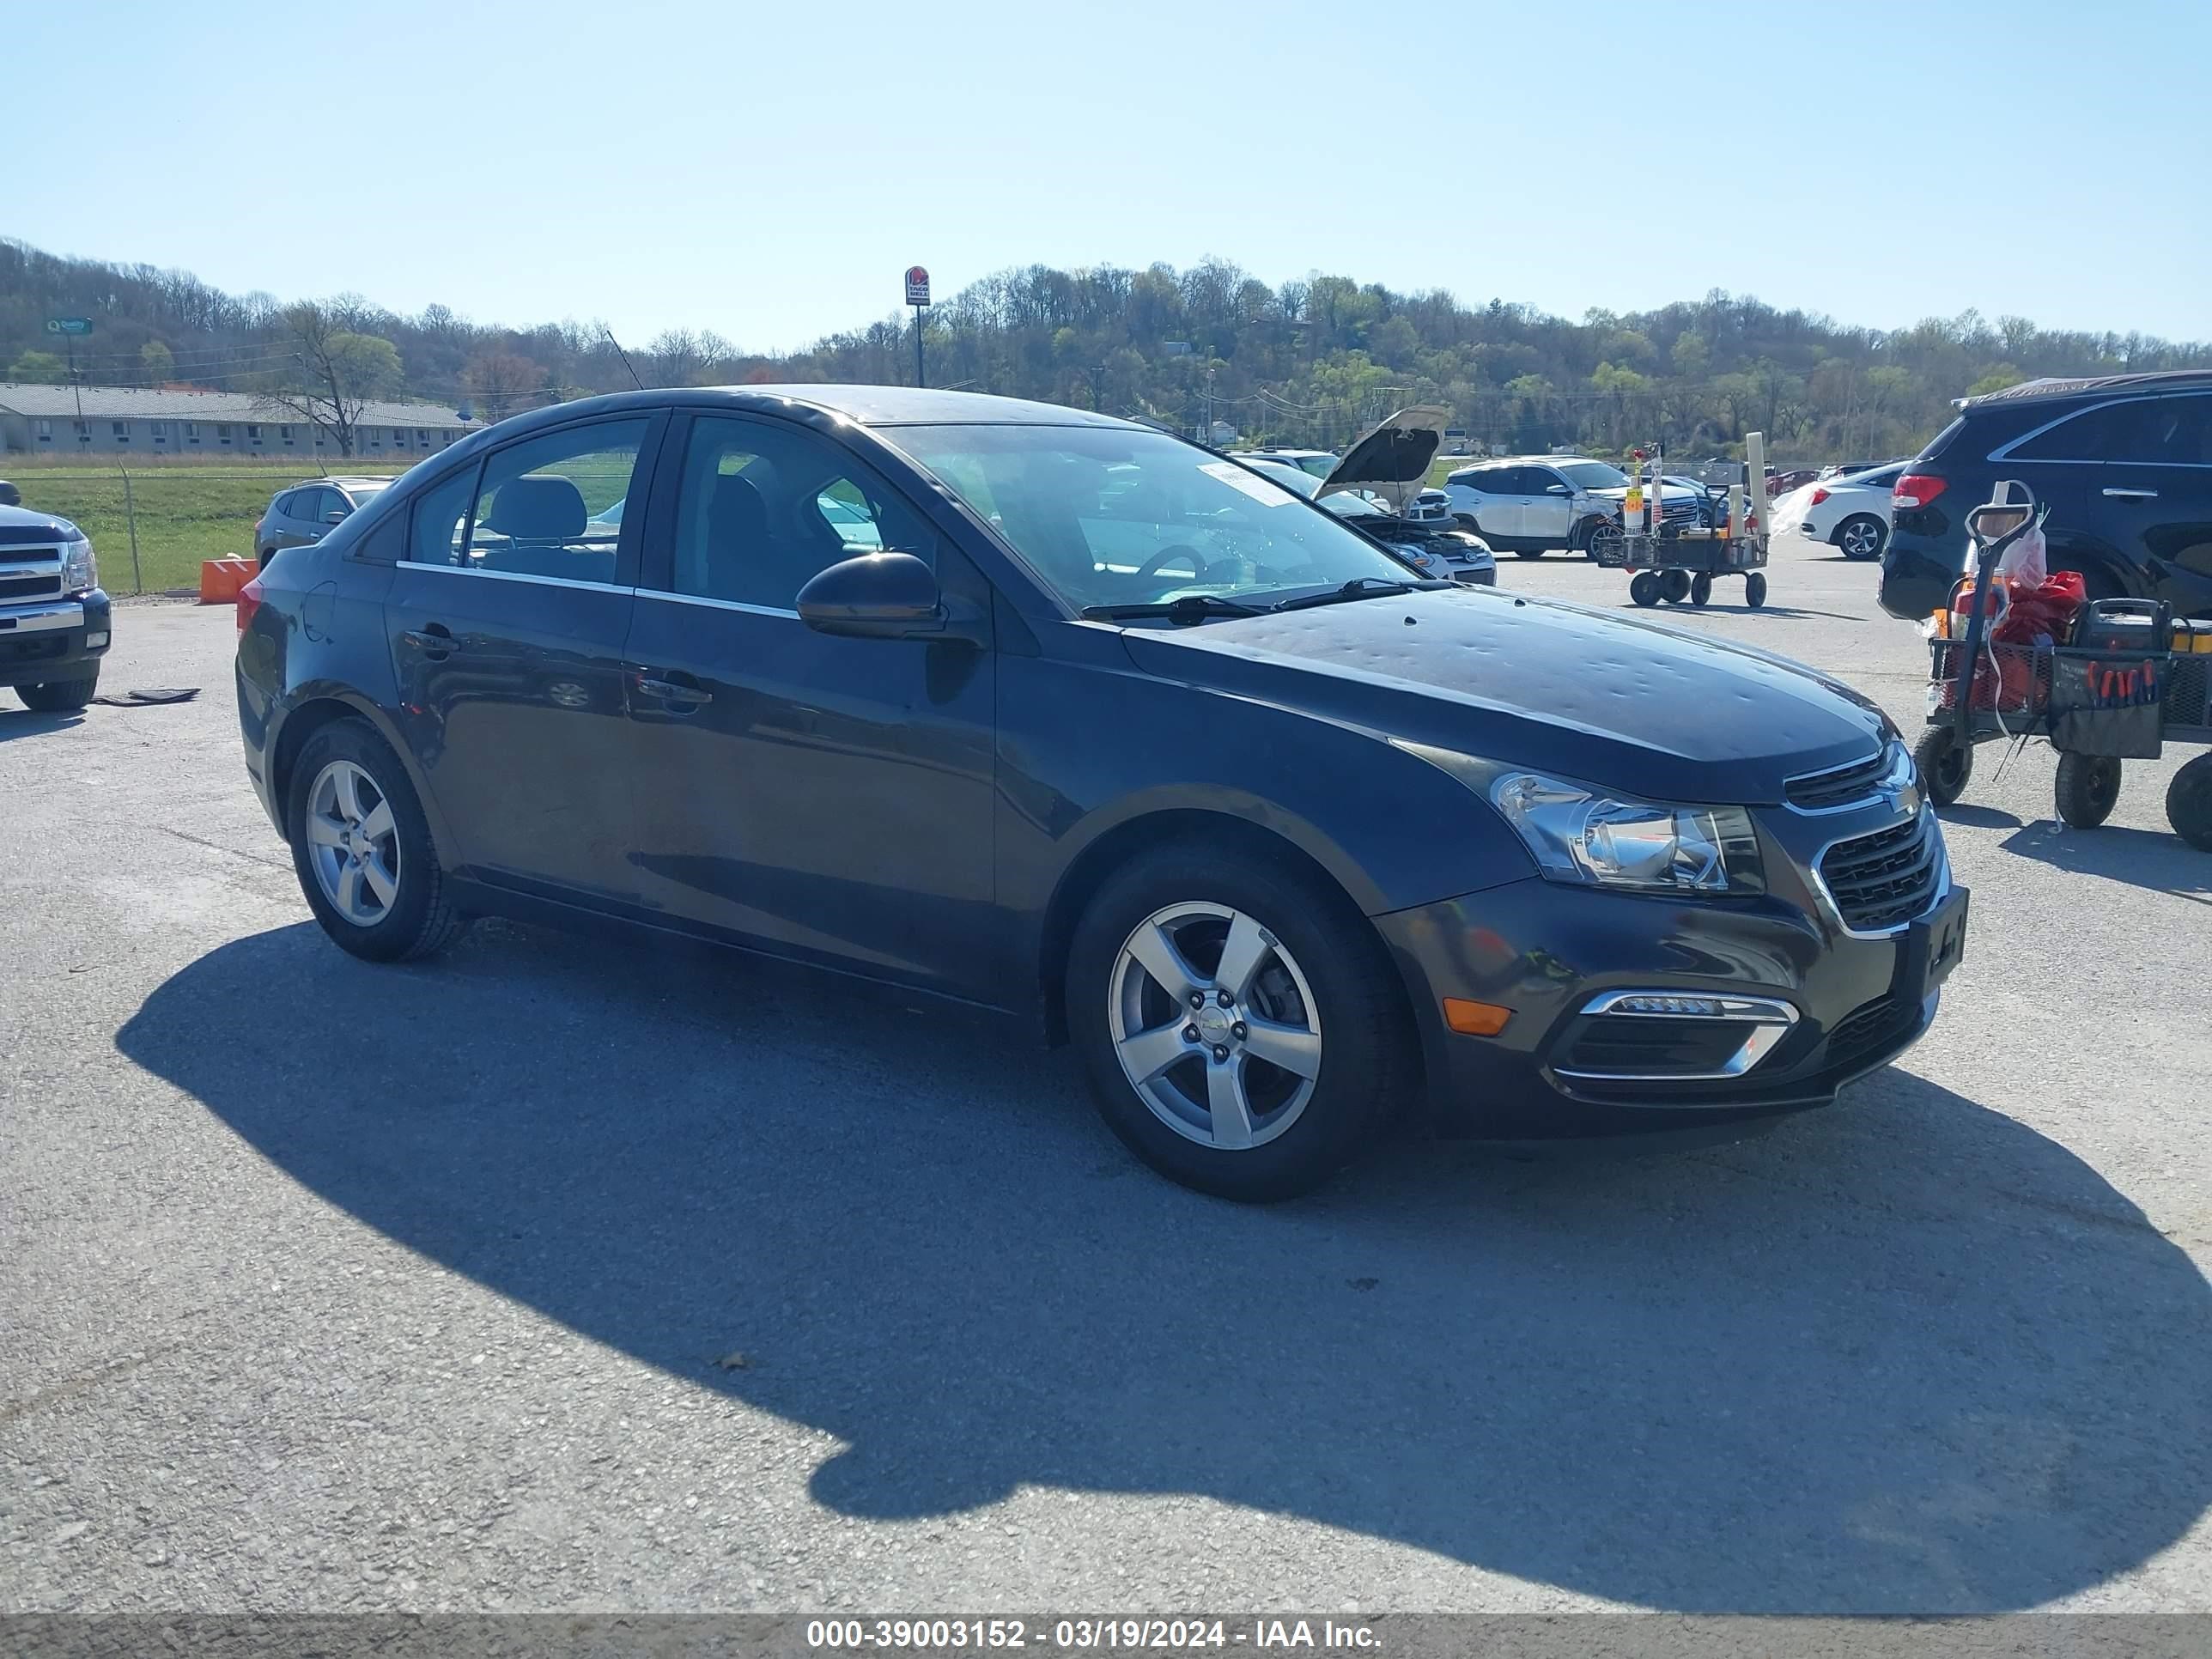 vin: 1G1PC5SB1F7175125 1G1PC5SB1F7175125 2015 chevrolet cruze 1400 for Sale in 62232, 2436 Old Country Inn Dr, Caseyville, Illinois, USA